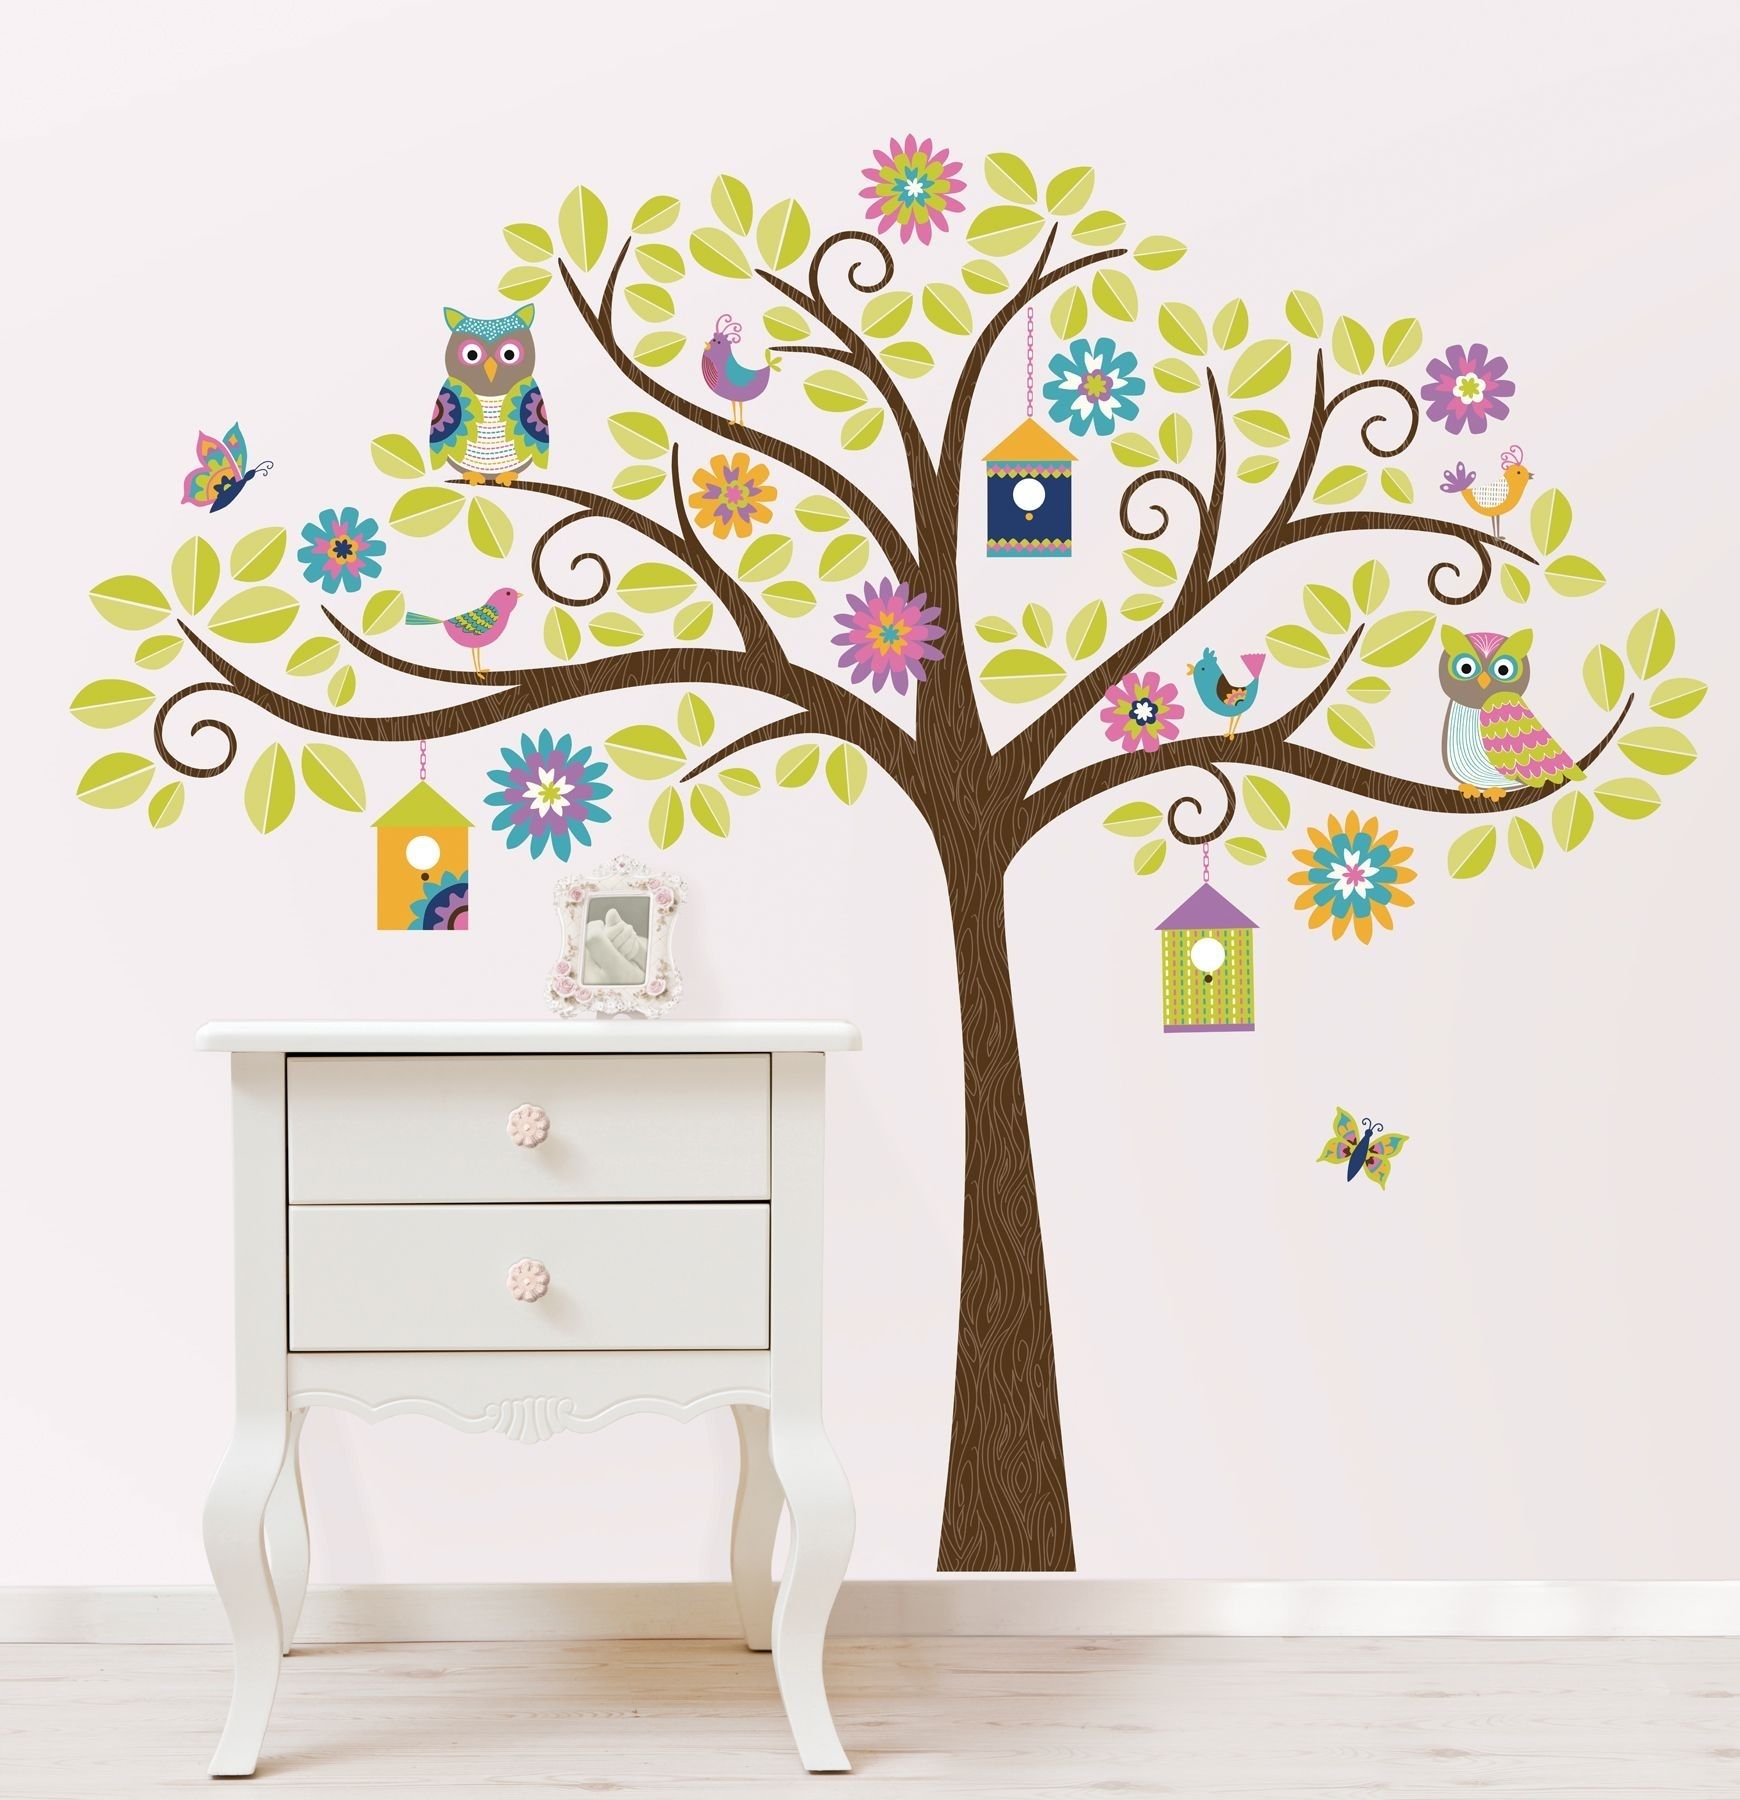 Hoot And Hang Out Tree Wall Art Sticker Kit Intended For Wall Tree Art (View 18 of 20)